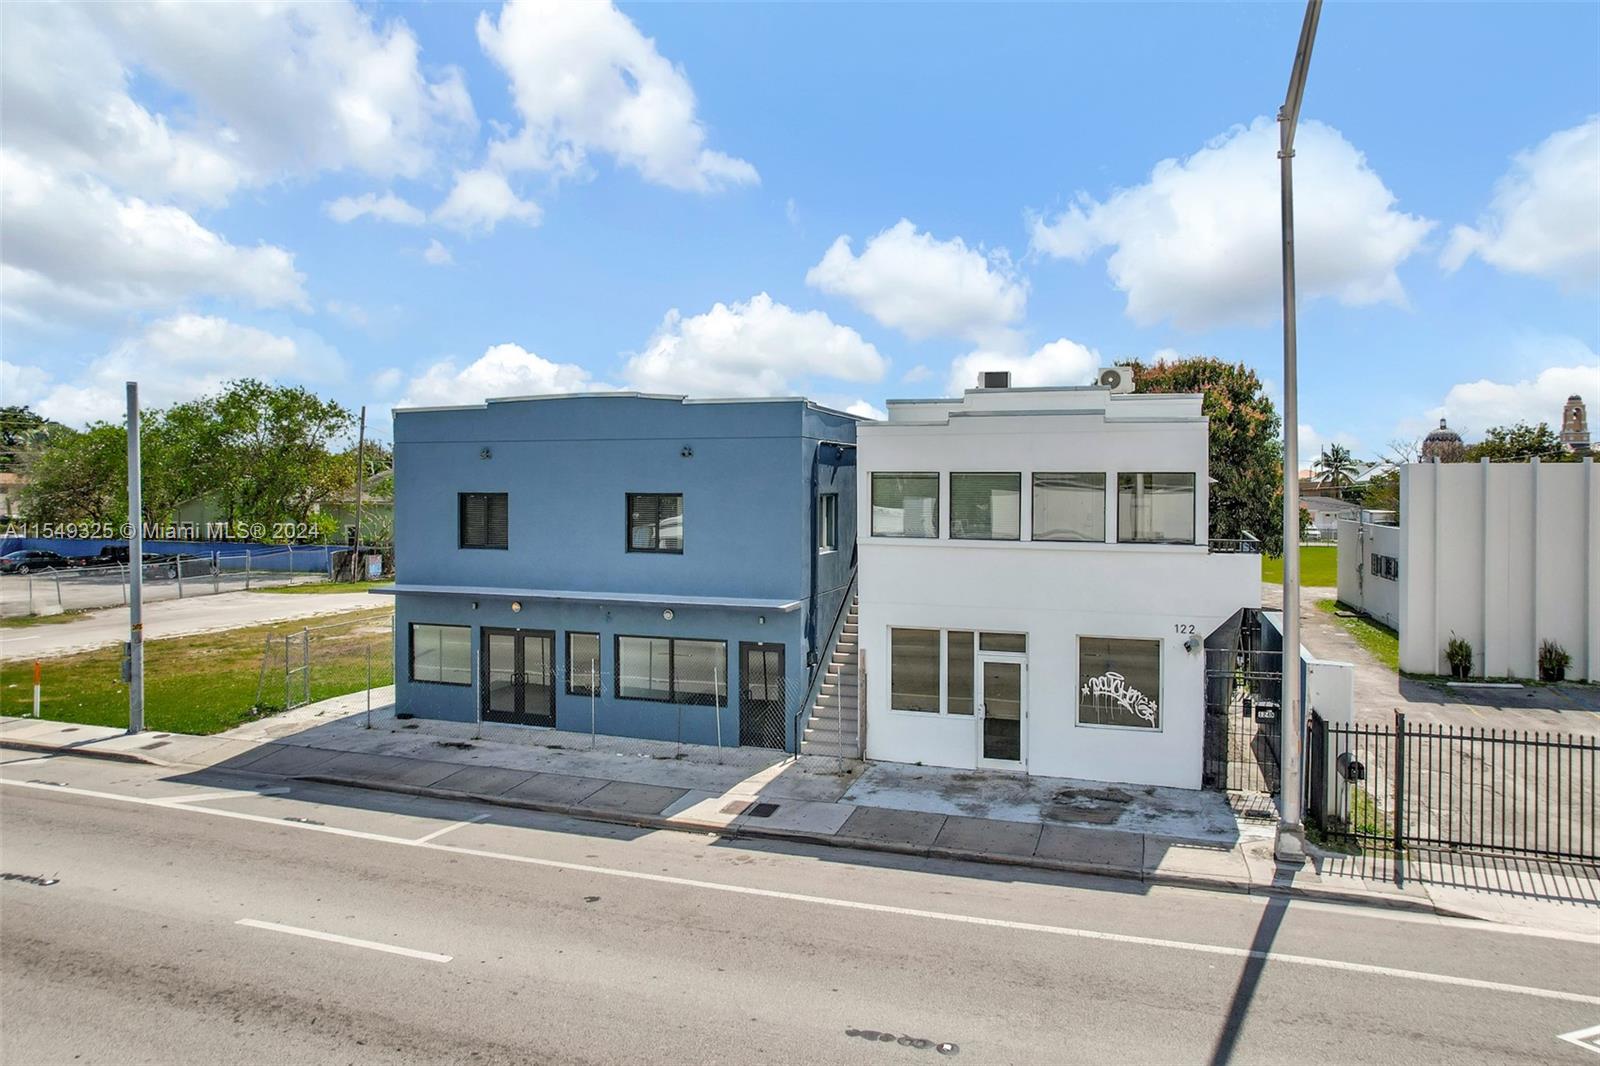 Undisclosed For Sale A11549325, FL